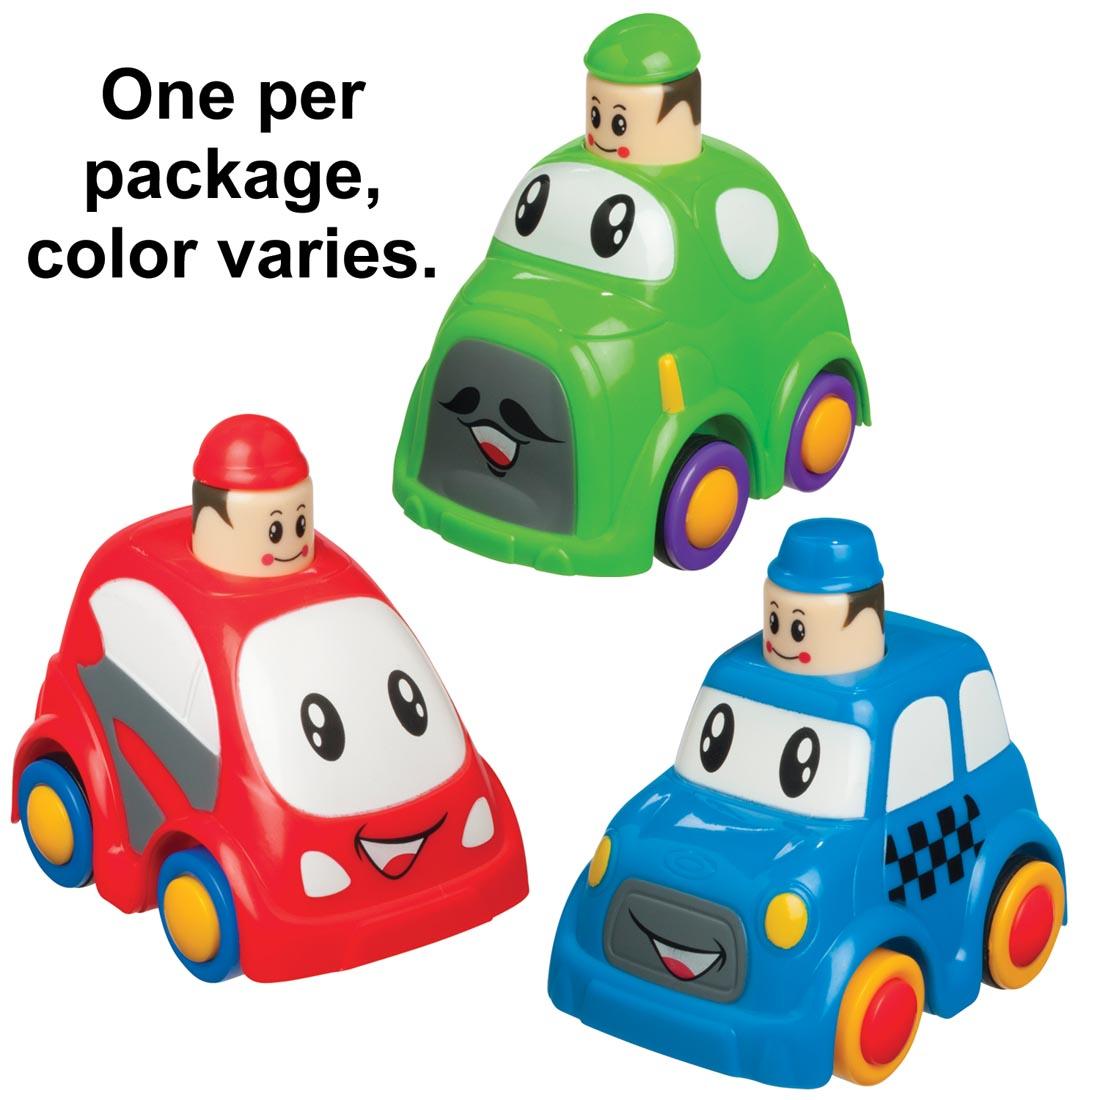 Three different Zoomsters Push N' Go Toy Cars with the text One per package, color varies.